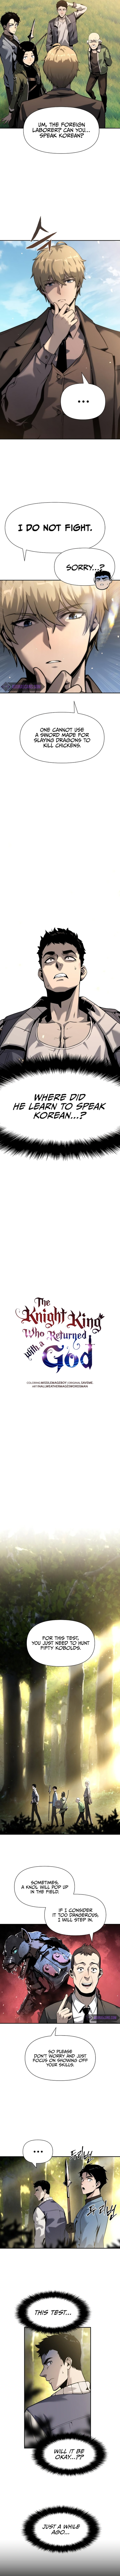 the_knight_king_who_returned_with_a_god_10_2